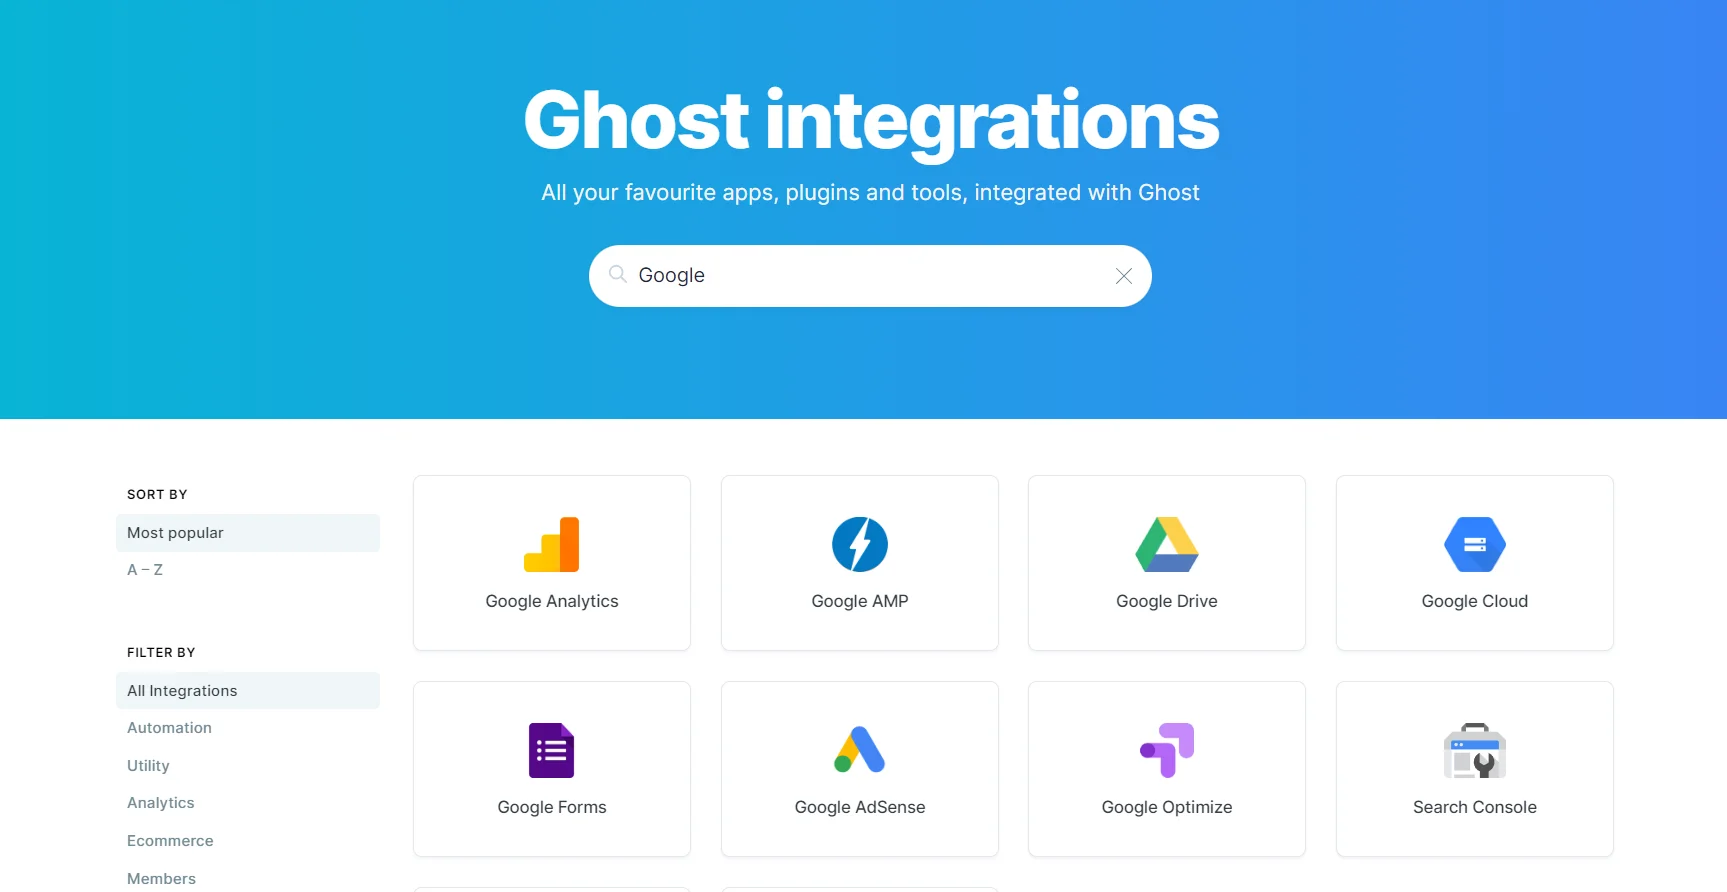 Screenshot of where to find the Ghost integrations for Google Analytics and Search Console.